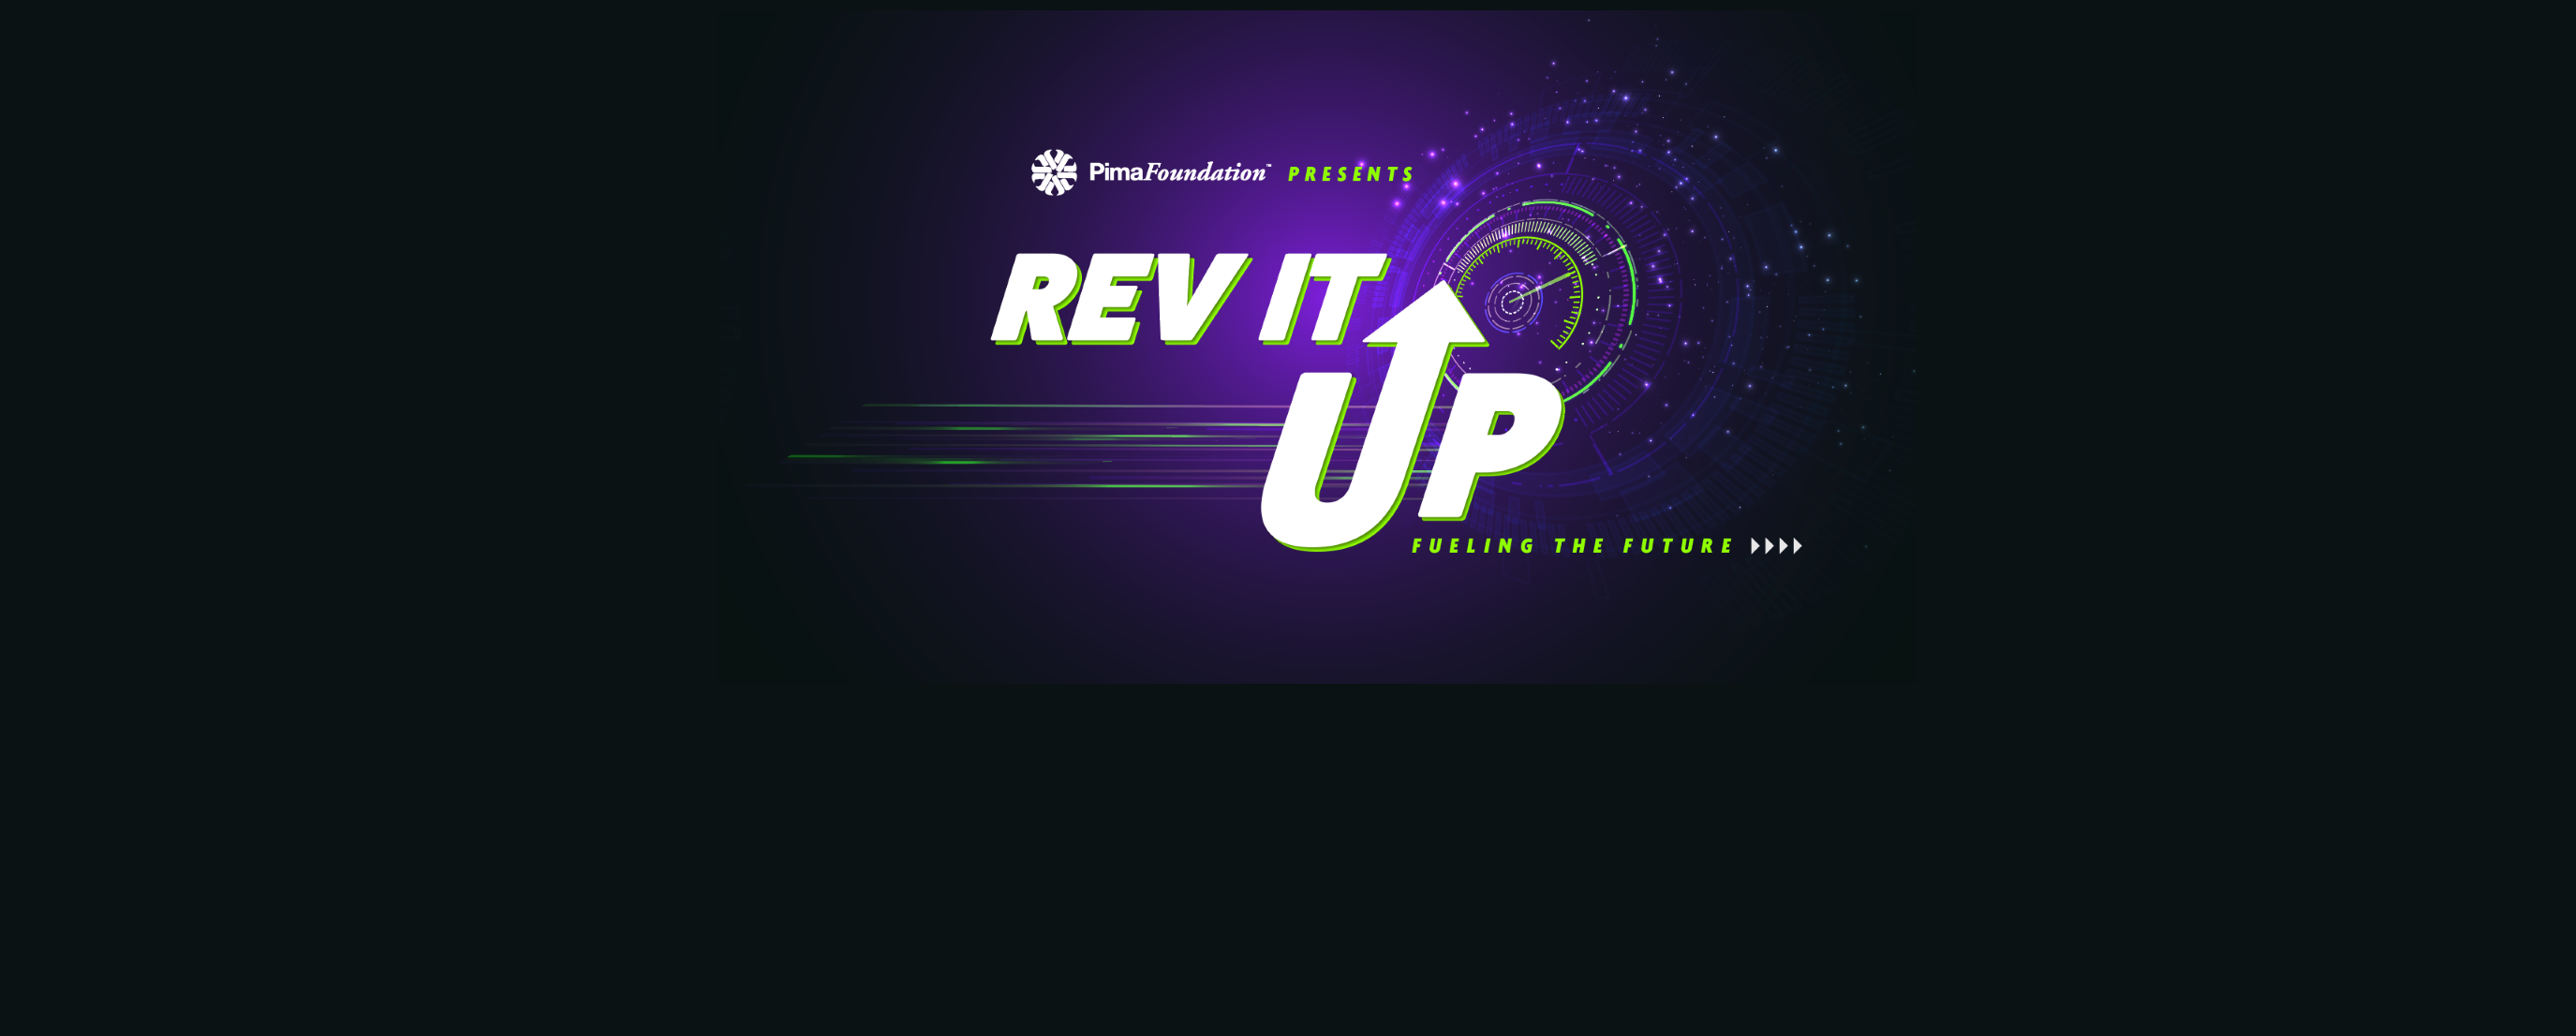 Purple, green, and white Rev it Up logo that says, "PimaFoundation Presents Rev It Up Fueling the Future."